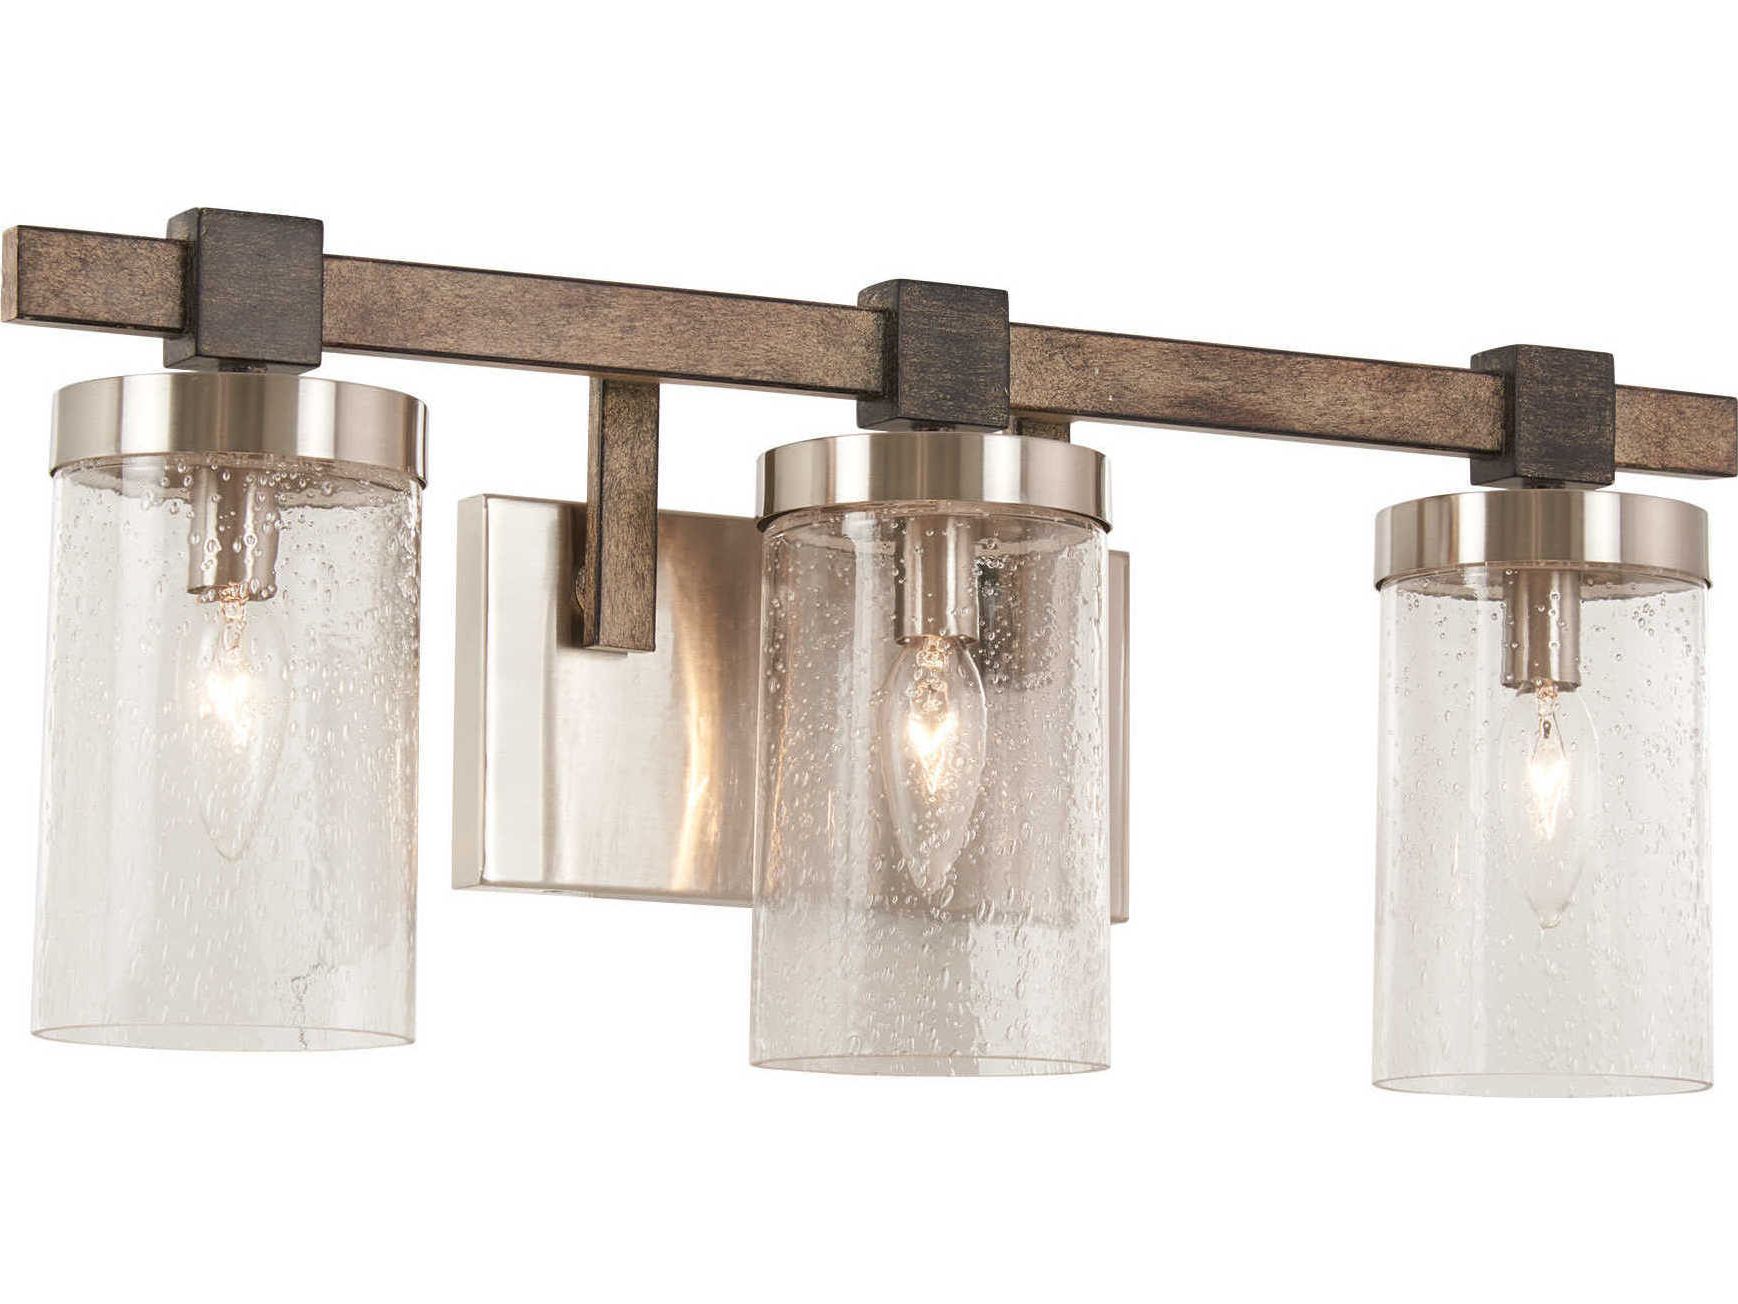 Minka Lavery Bridlewood Stone Grey / Brushed Nickel Glass Intended For Most Popular Stone Gray And Nickel Chandeliers (View 14 of 15)